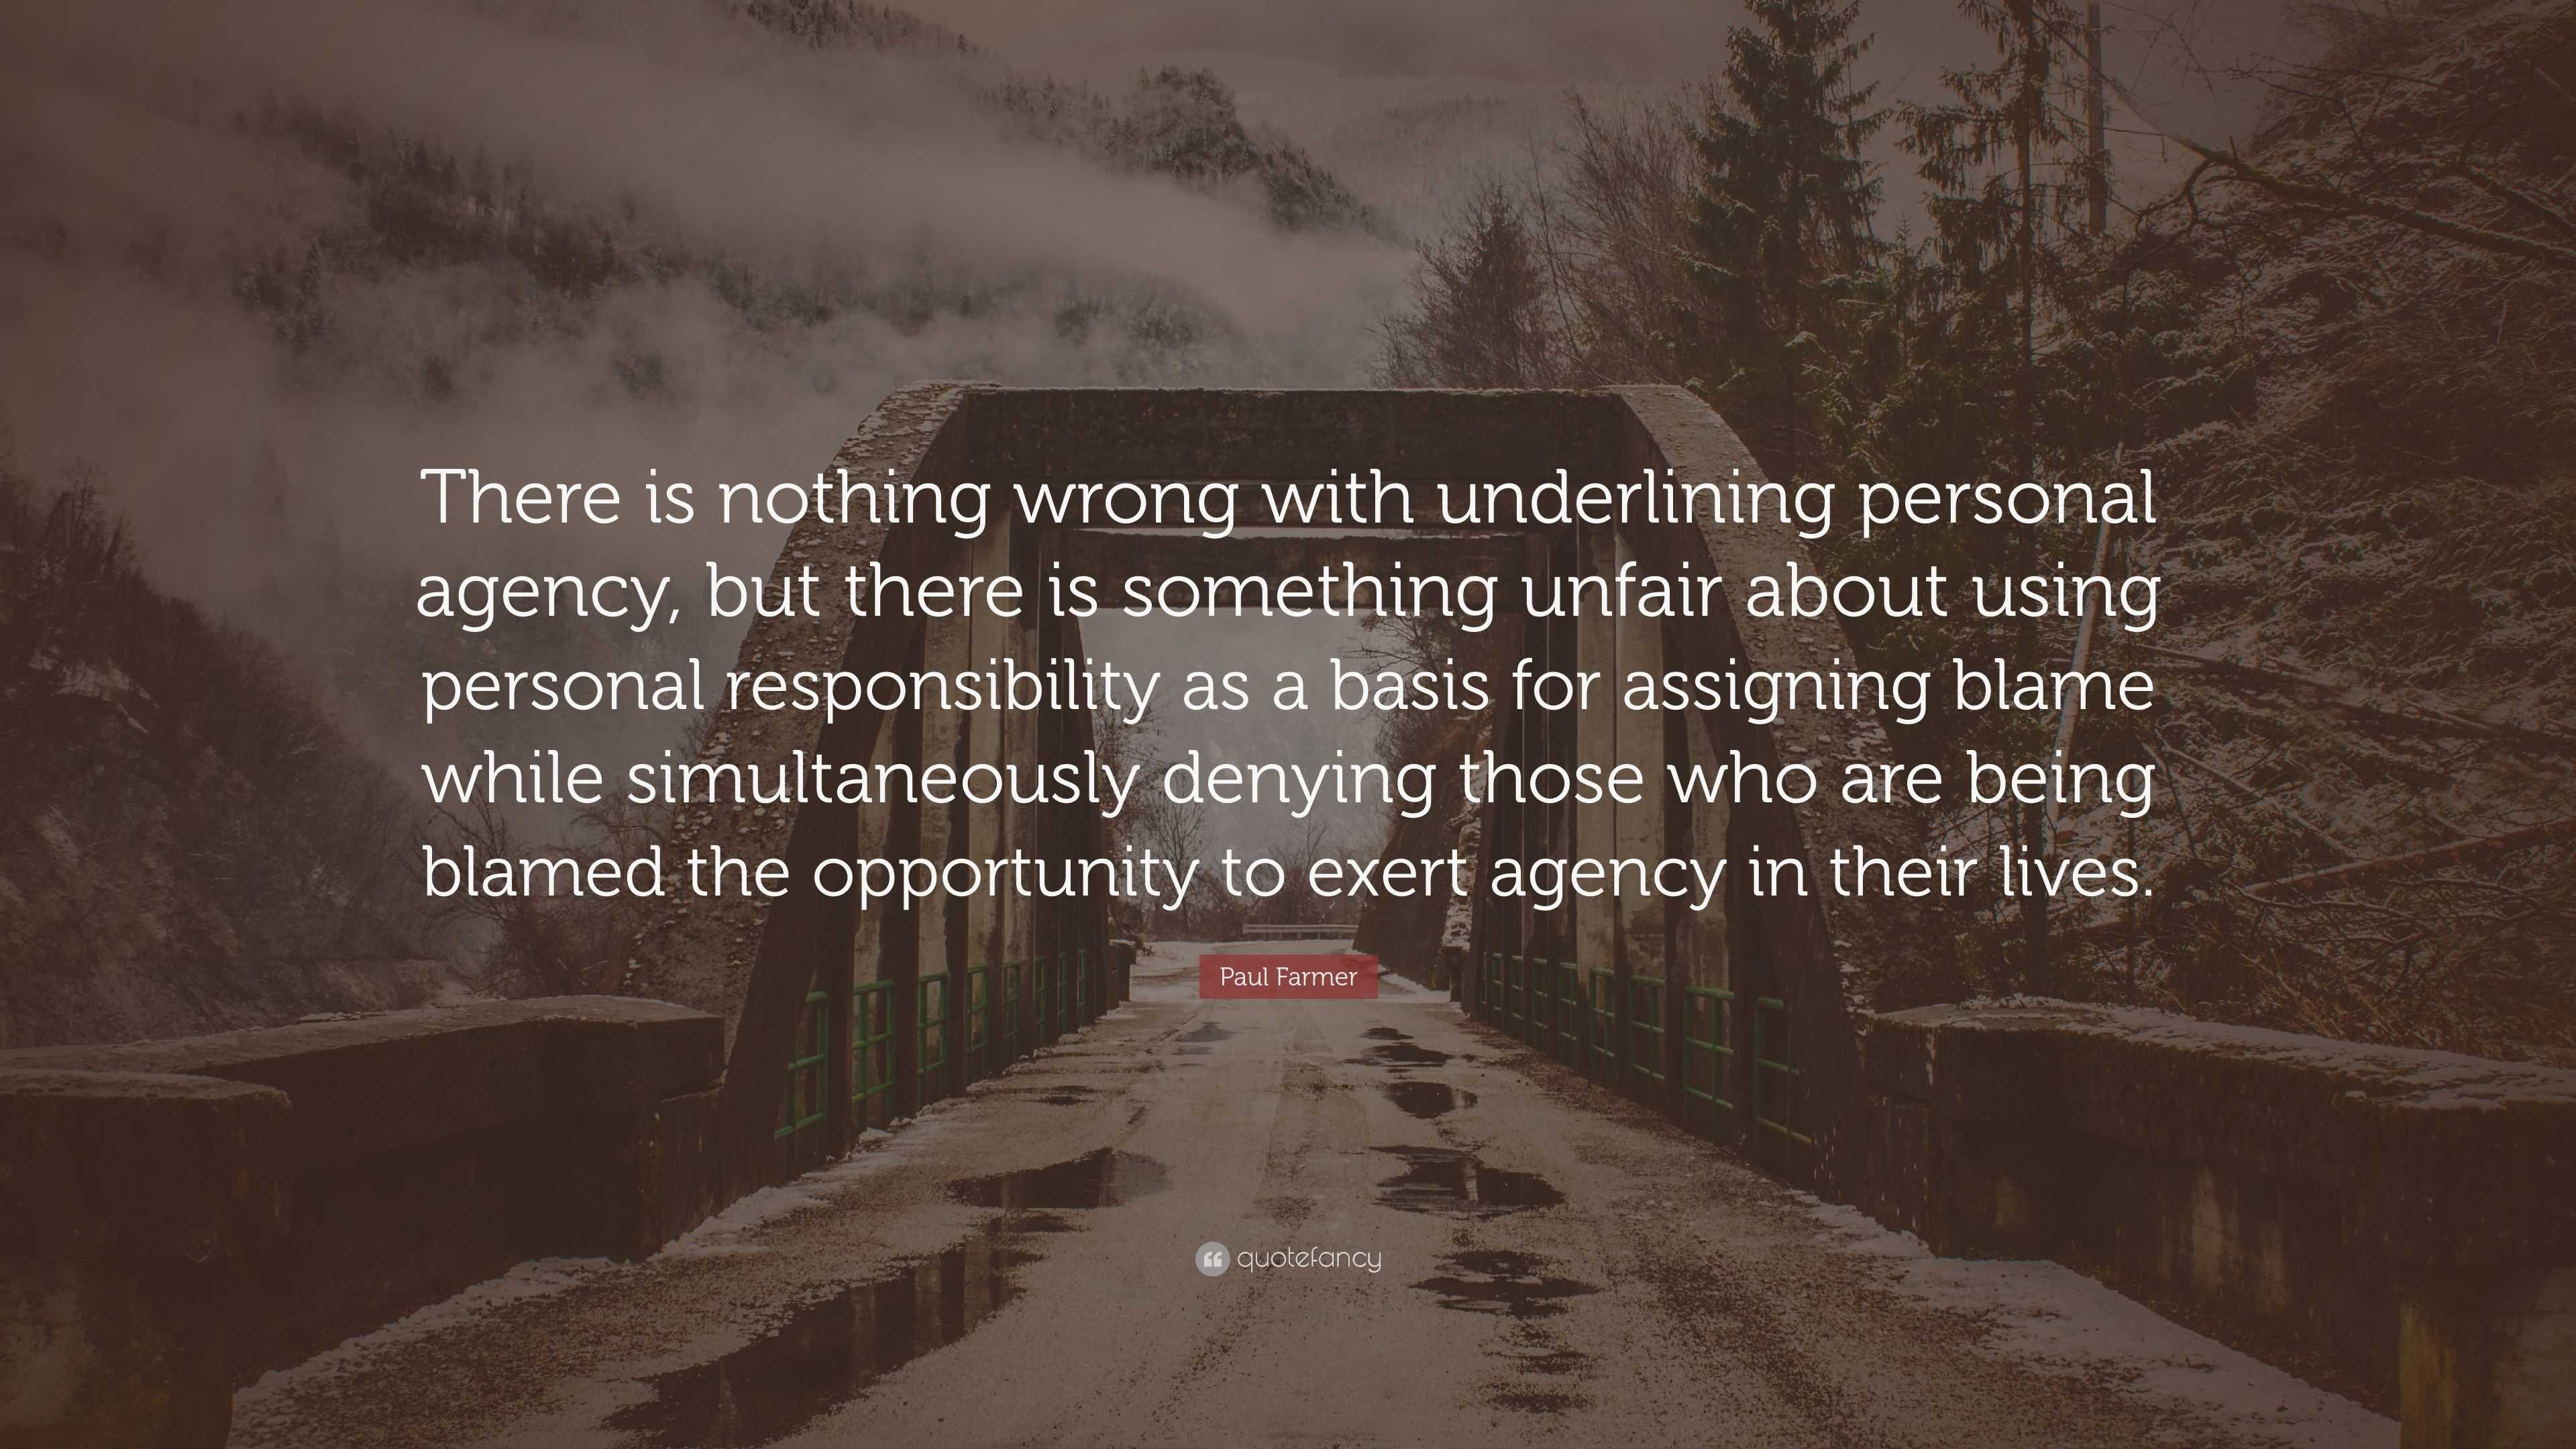 Paul Farmer Quote: “There is nothing wrong with underlining personal ...